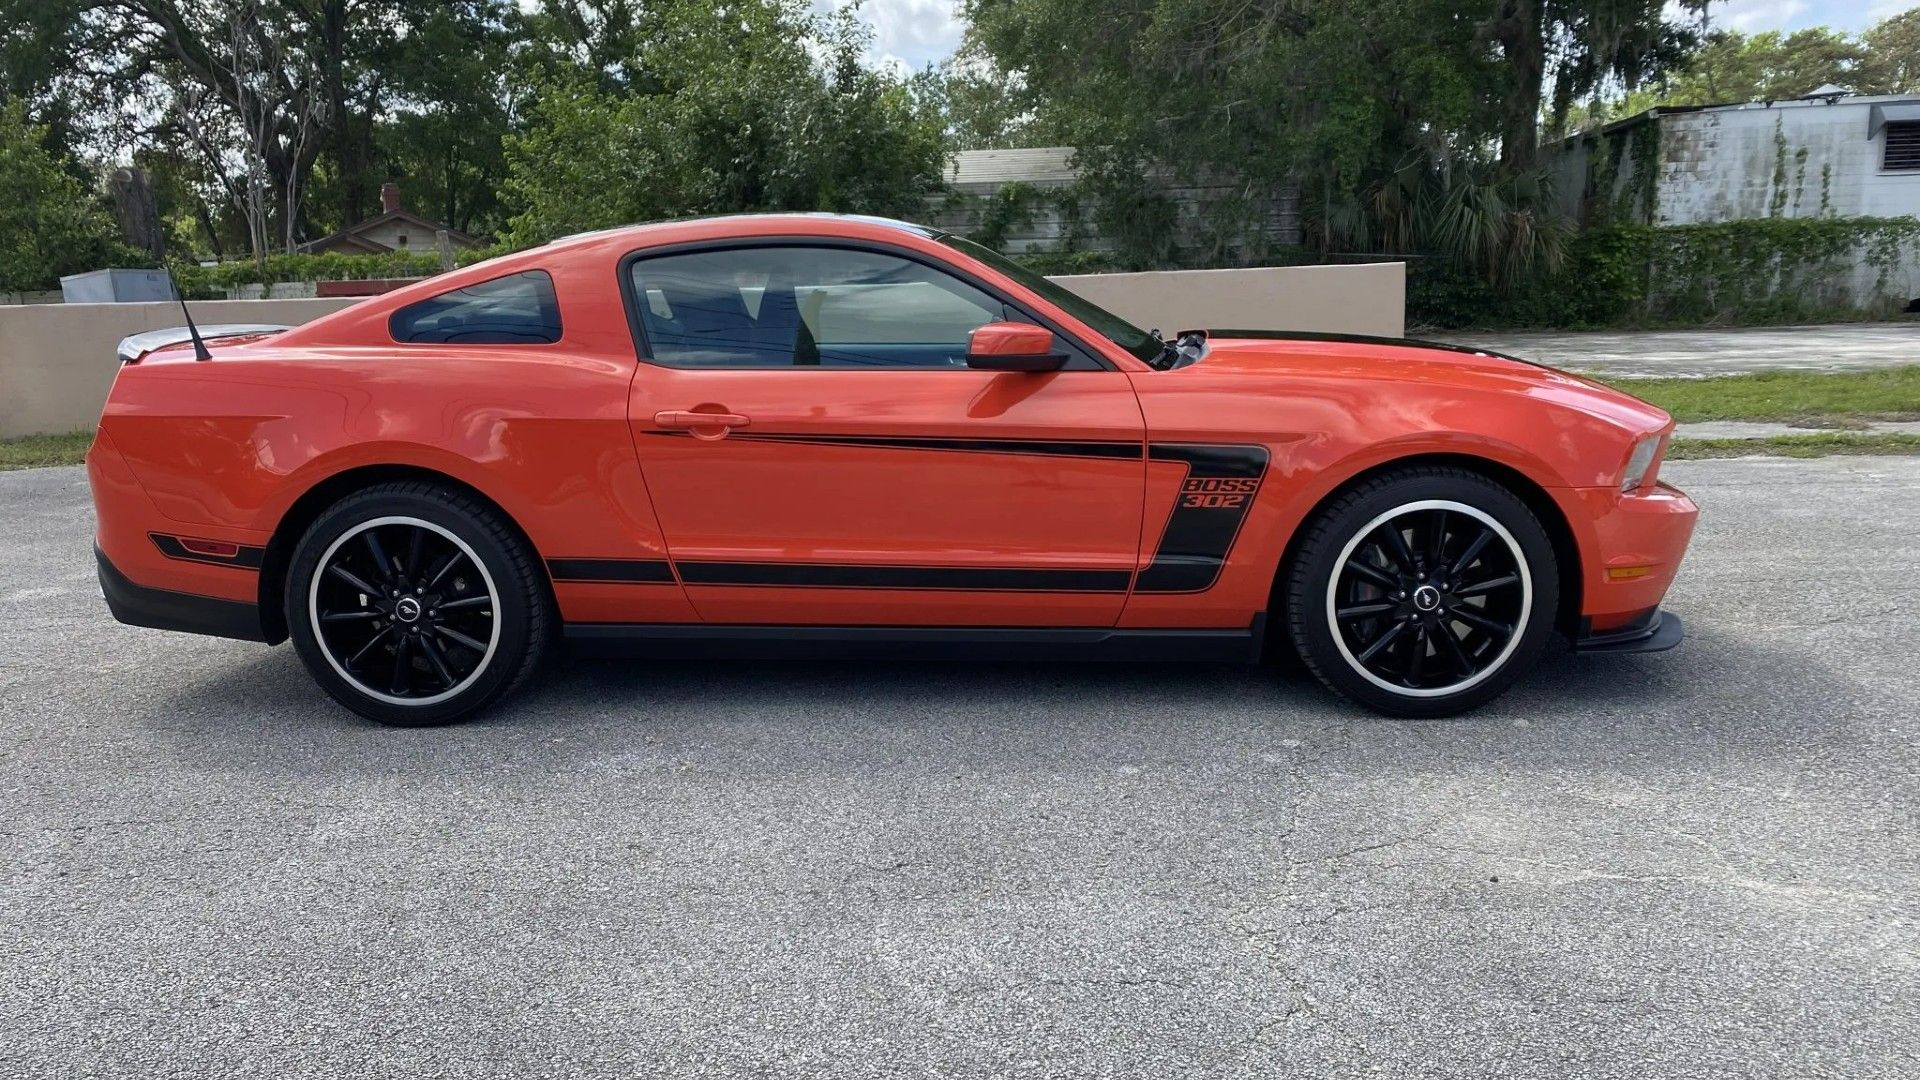 Red and Black 2012 Ford Mustang Boss 302